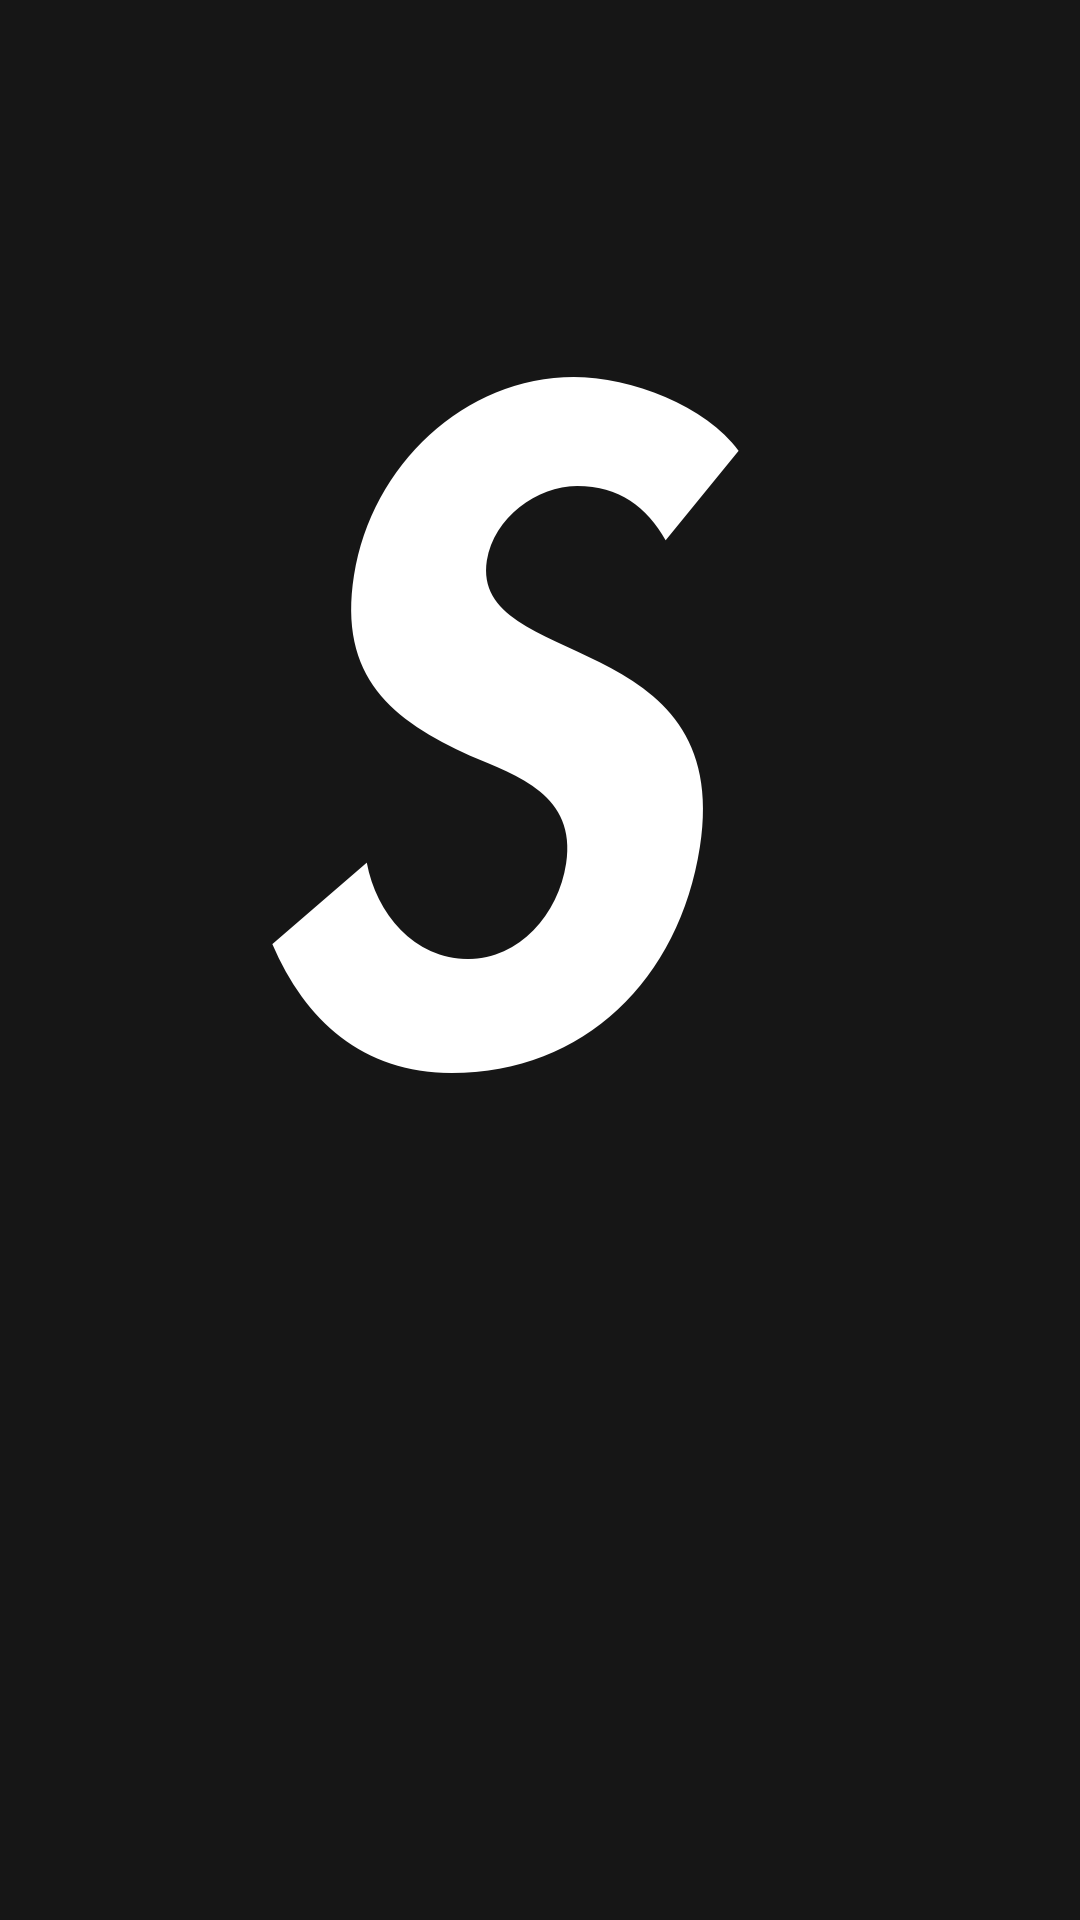 Supreme Wallpapers Iphone 5 Wallpaper Cave